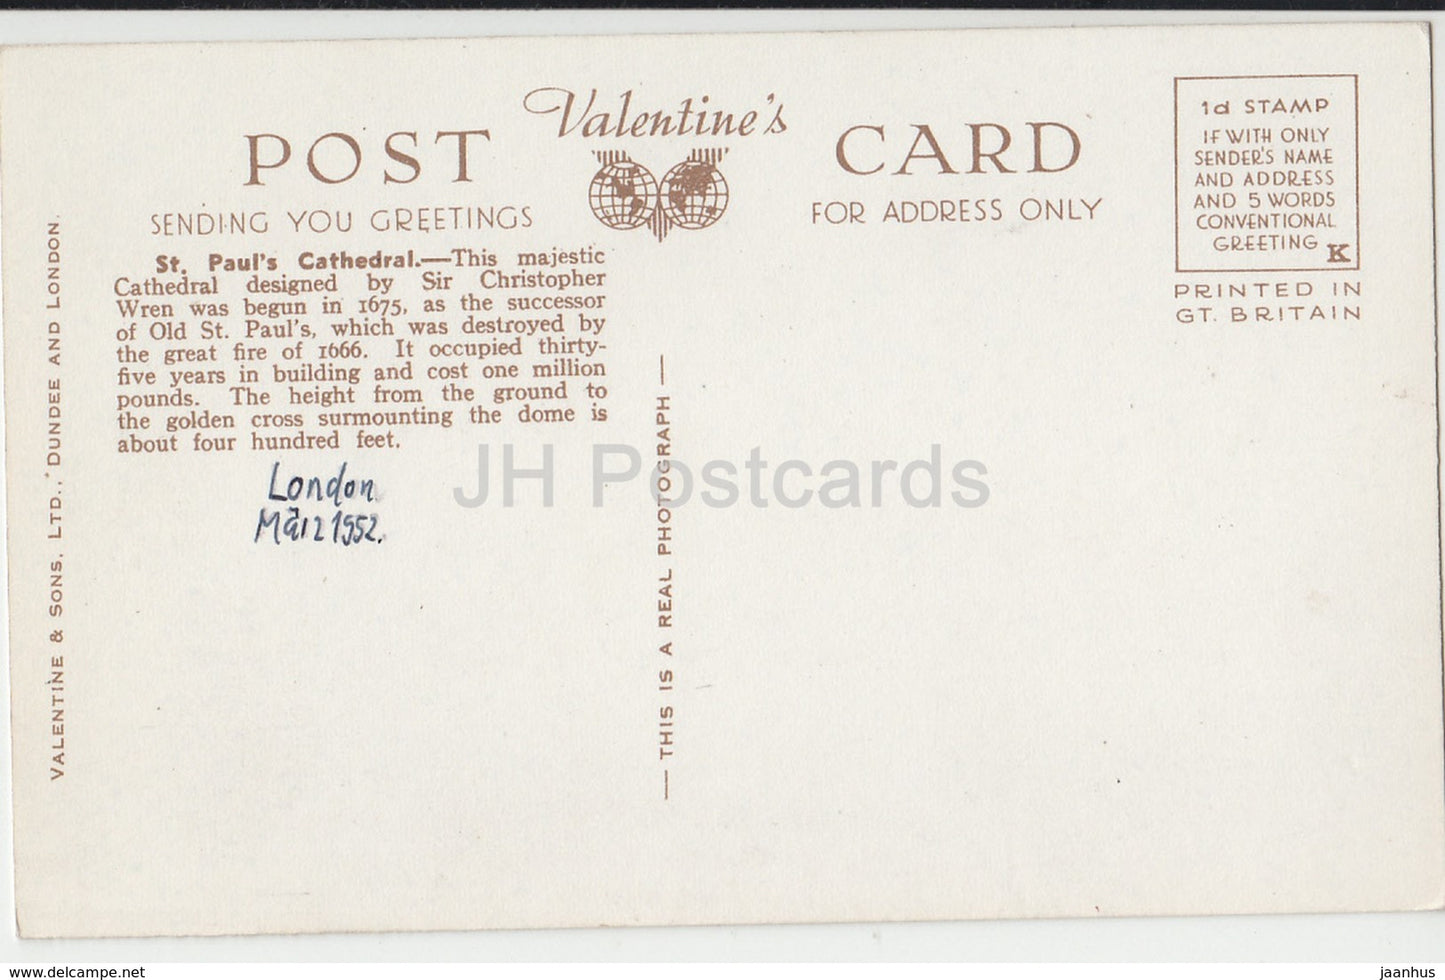 London - St. Paul' s Cathedral - H.9147 - 1952 - United Kingdom - England - used